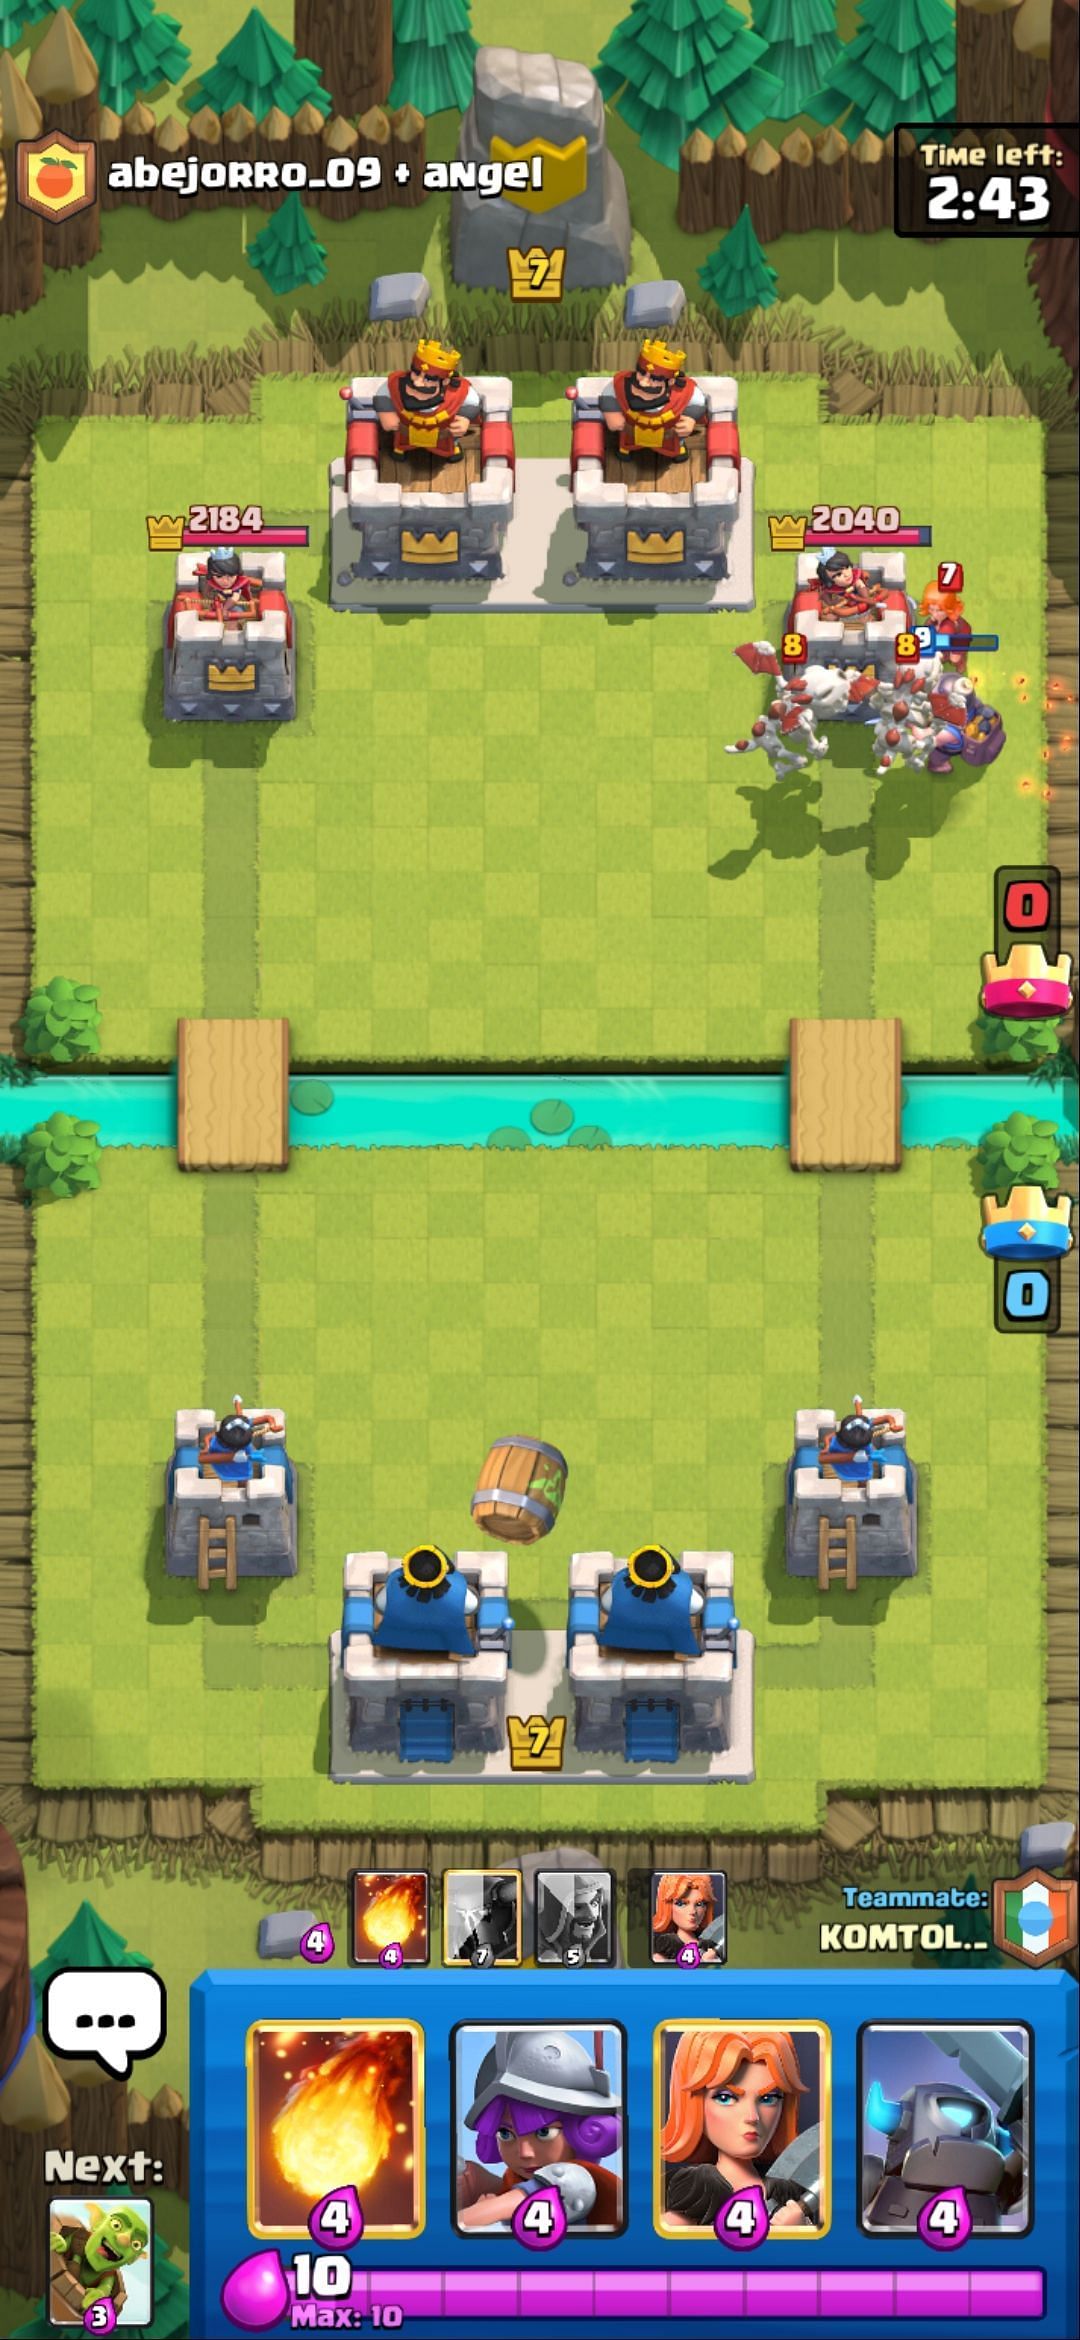 2v2 Battles in Clash Royale All you need to know